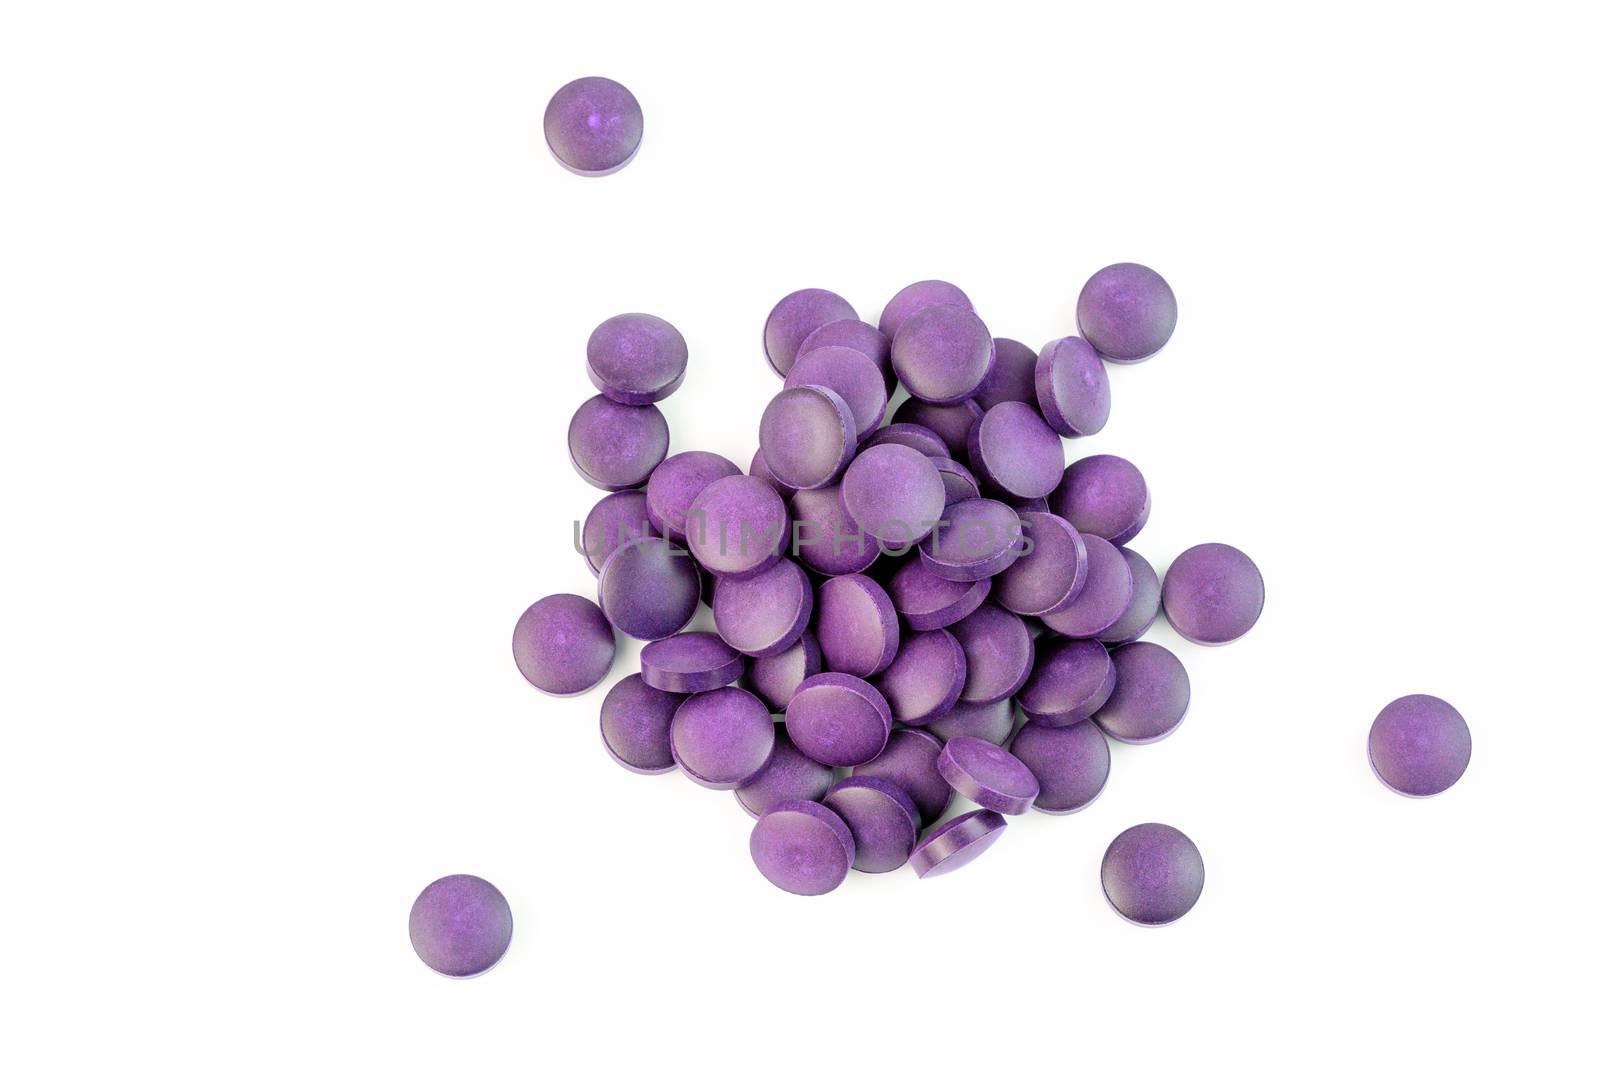 a small pile of purple compacted powder pills isolated on white background in linear perspective.